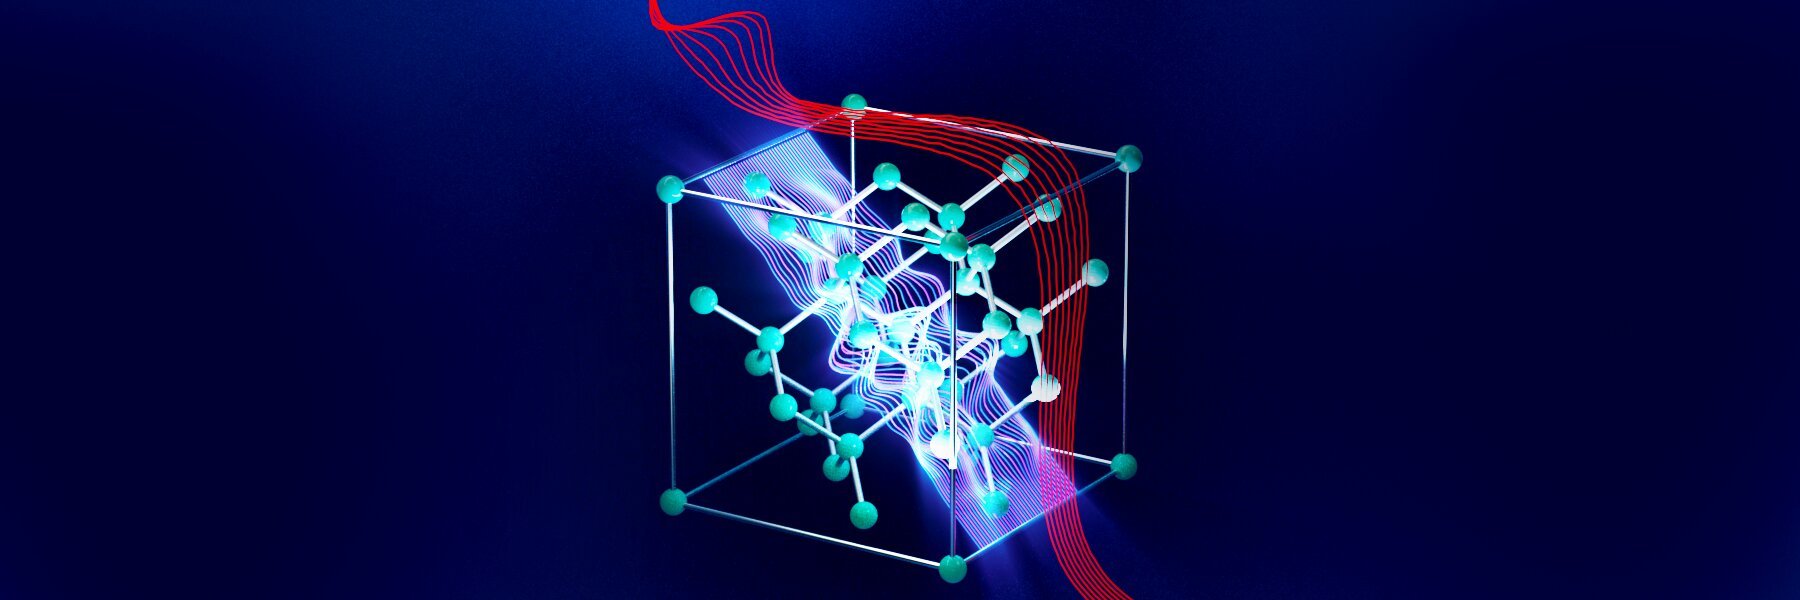 This figure demonstrates picophotonics in the 3D lattice of silicon atoms. The red wave represents the conventional electromagnetic wave propagating in the solid. The blue inner wave represents the new predicted picophotonic wave. Courtesy of Zubin Jacob, Purdue University.